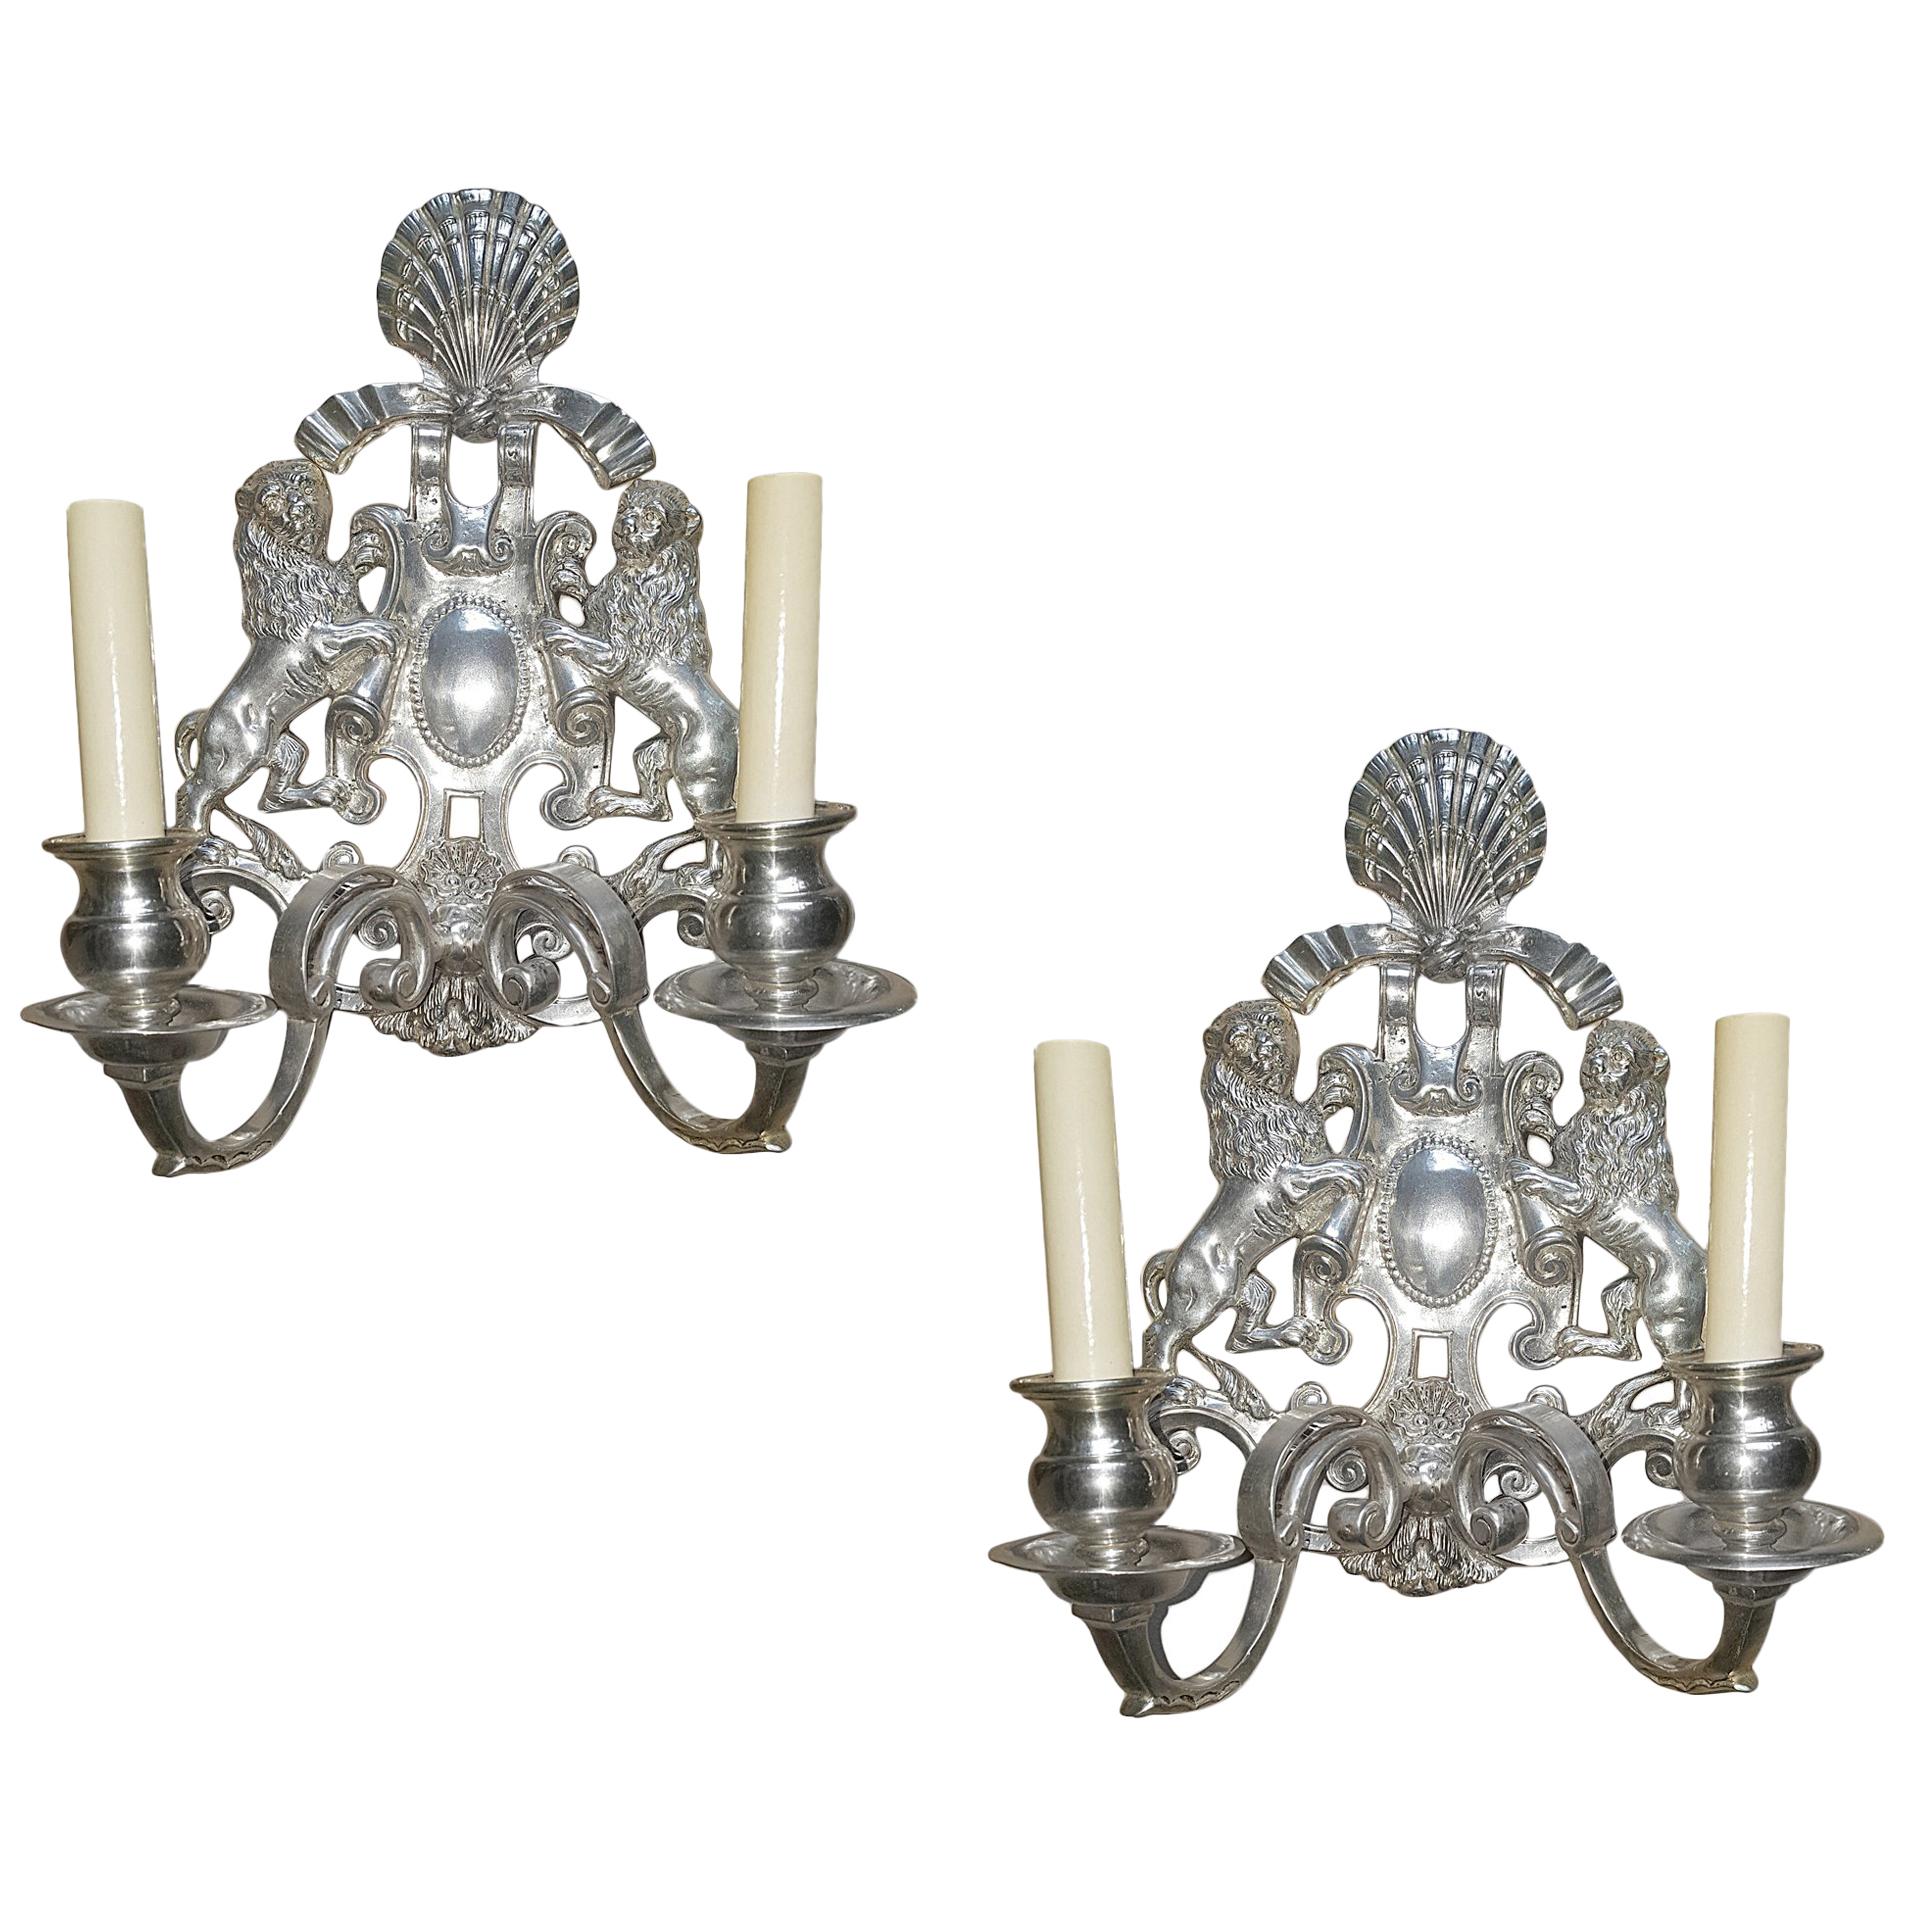 Set of English Silver Plated Sconces, Sold in Pairs